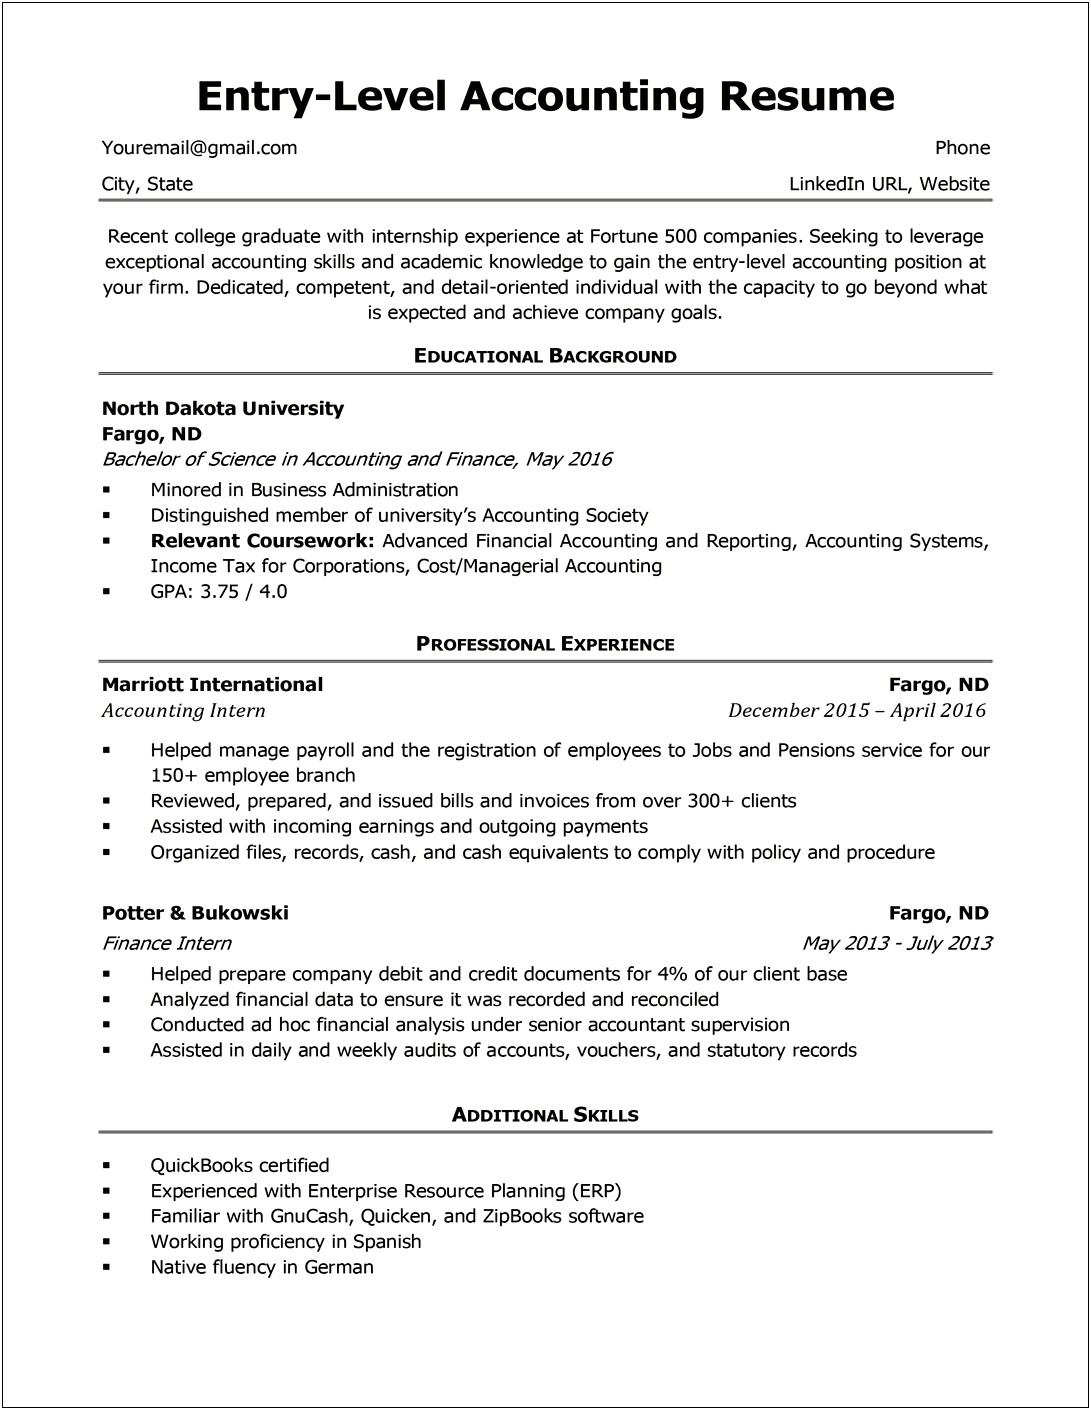 Relevant Coursework In Resume Example